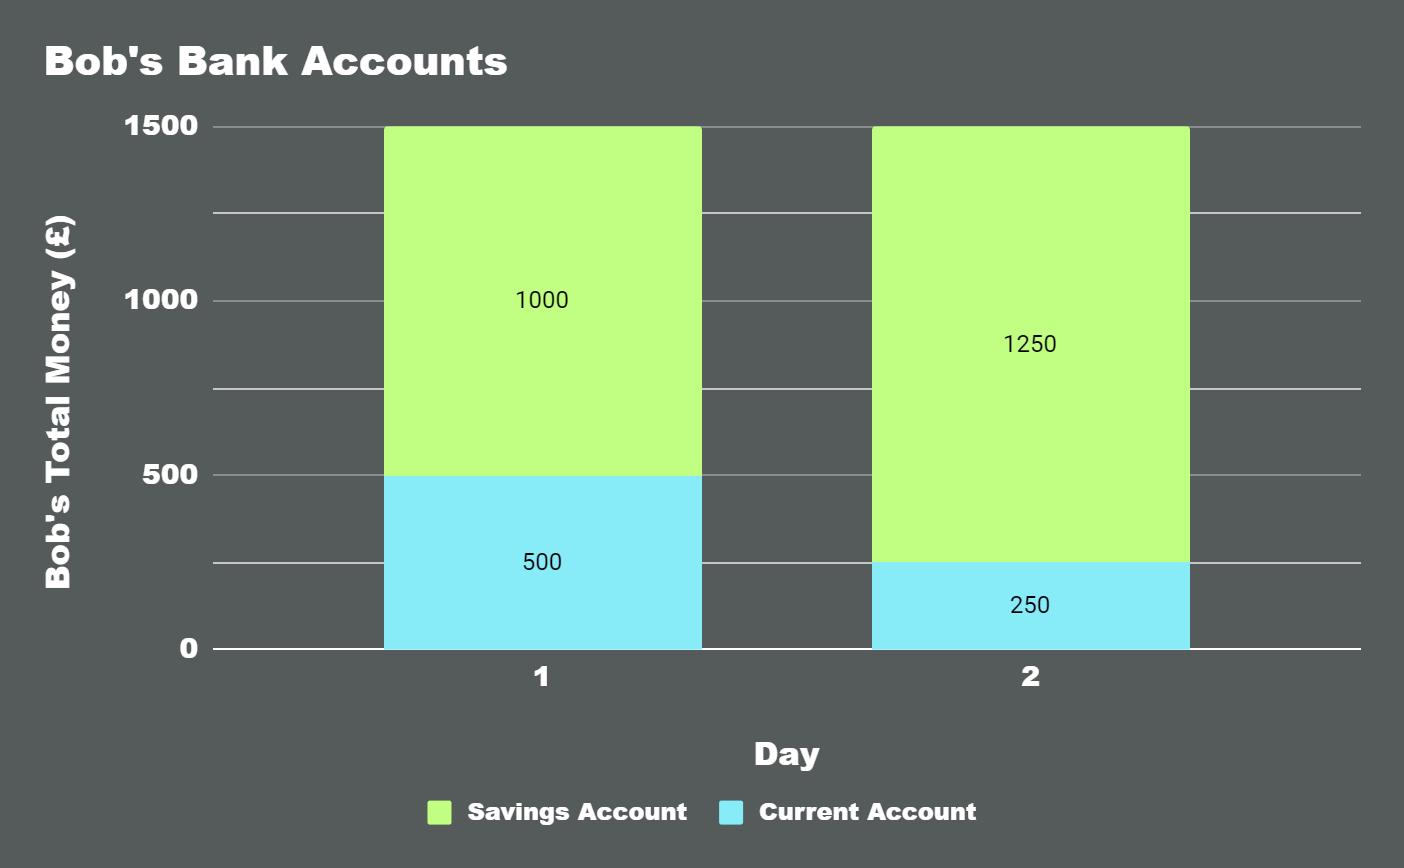 Comparison of Bob\'s savings account to his current account across a two day period.